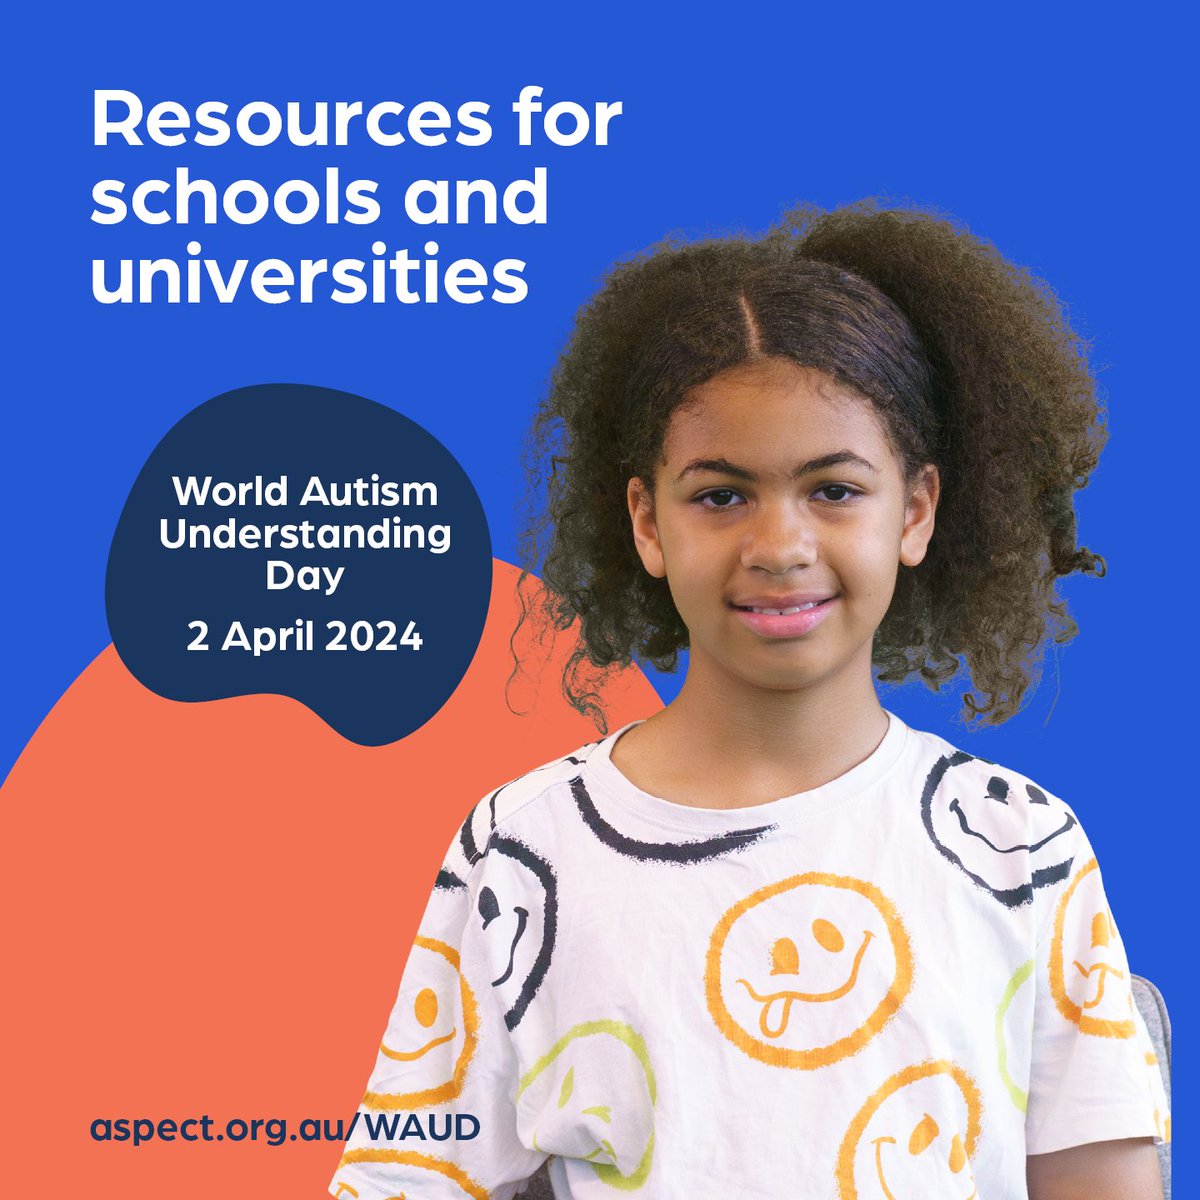 Teachers and educators, explore a variety of activities for World #Autism Understanding Day (2 April) with your students and continue the journey throughout the entire month of April 🙌 #WAUD2024 #autismUnderstanding #education #specialEducation #inclusion aspect.org.au/waud/for-schoo…